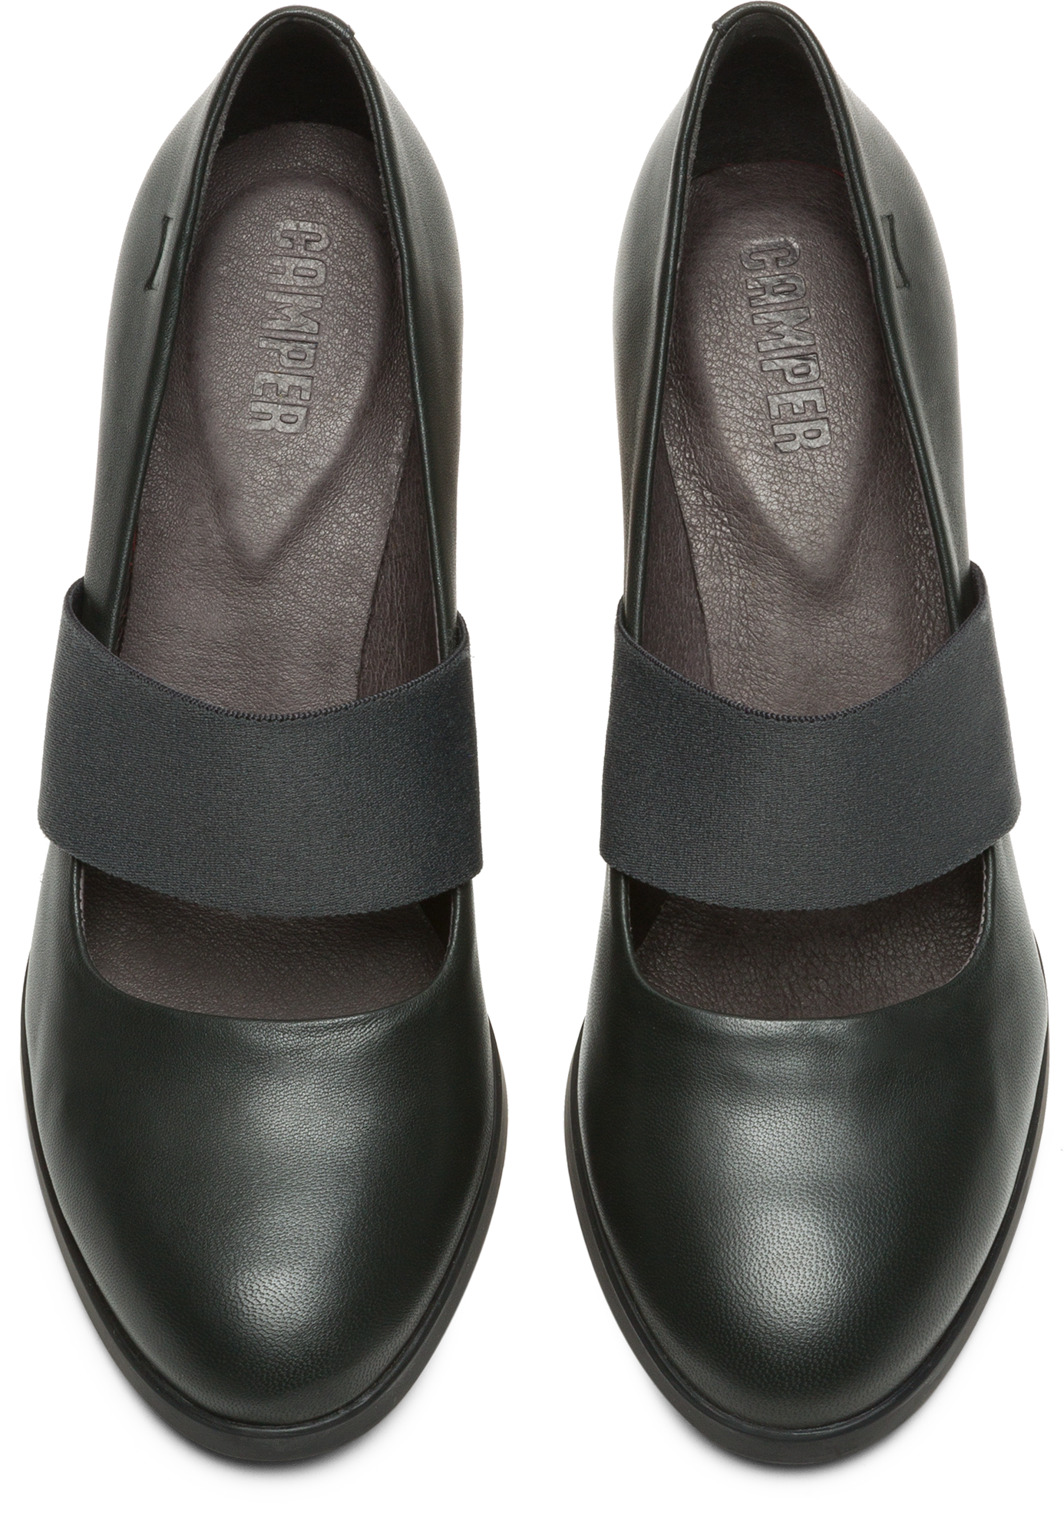 Kara Grey Formal Shoes for Women - Fall/Winter collection - Camper USA